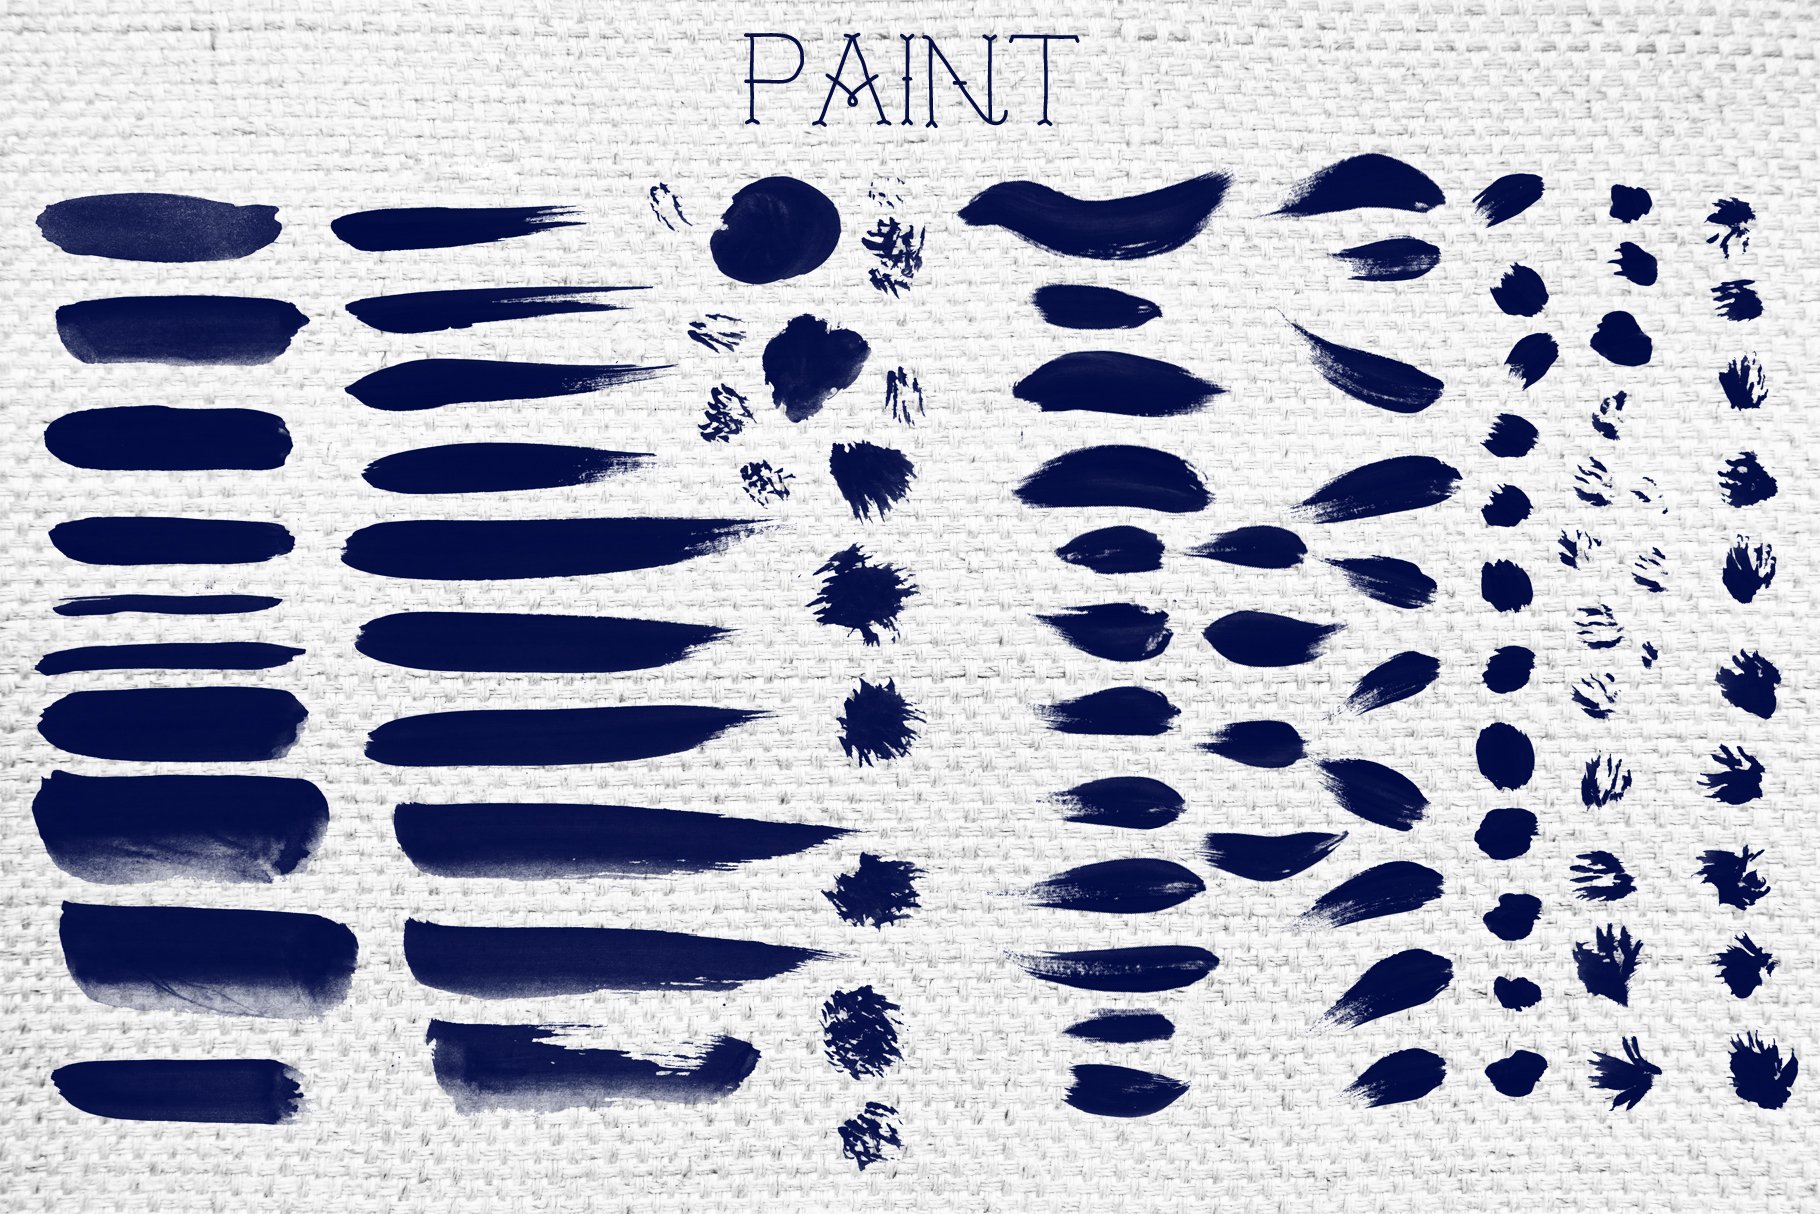 The real paint brushes for PSpreview image.